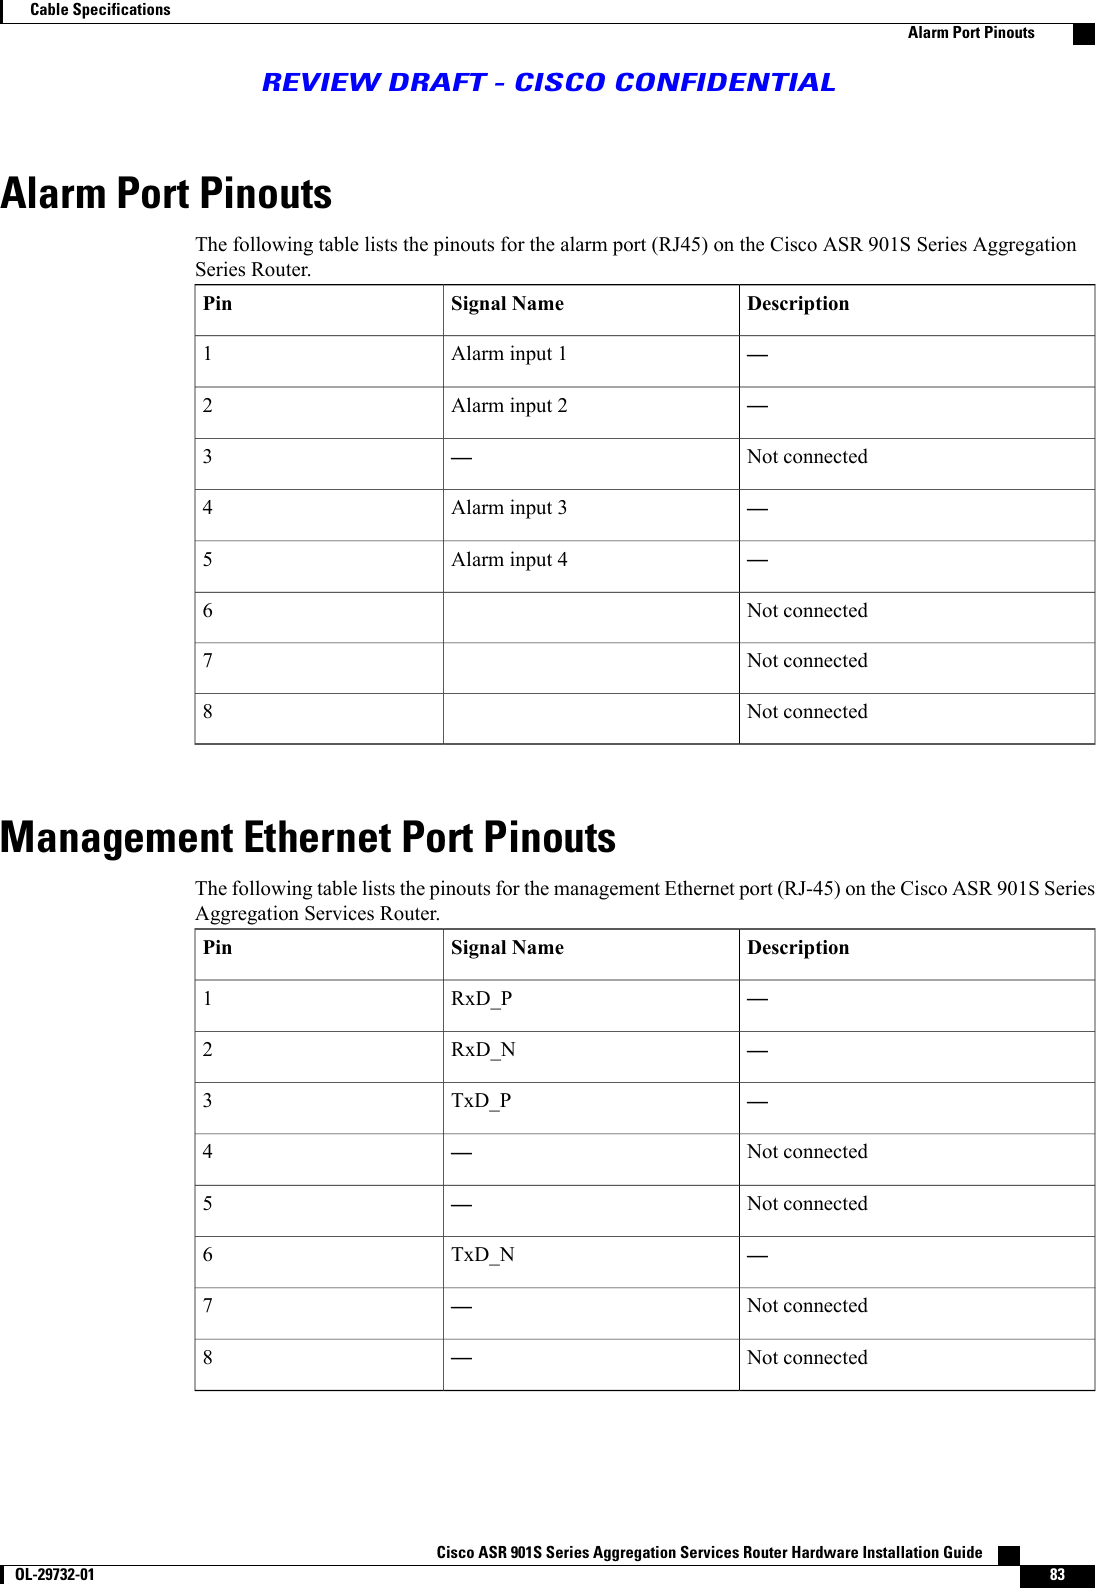 Alarm Port PinoutsThe following table lists the pinouts for the alarm port (RJ45) on the Cisco ASR 901S Series AggregationSeries Router.DescriptionSignal NamePin—Alarm input 11—Alarm input 22Not connected—3—Alarm input 34—Alarm input 45Not connected6Not connected7Not connected8Management Ethernet Port PinoutsThe following table lists the pinouts for the management Ethernet port (RJ-45) on the Cisco ASR 901S SeriesAggregation Services Router.DescriptionSignal NamePin—RxD_P1—RxD_N2—TxD_P3Not connected—4Not connected—5—TxD_N6Not connected—7Not connected—8Cisco ASR 901S Series Aggregation Services Router Hardware Installation Guide       OL-29732-01 83Cable SpecificationsAlarm Port PinoutsREVIEW DRAFT - CISCO CONFIDENTIAL